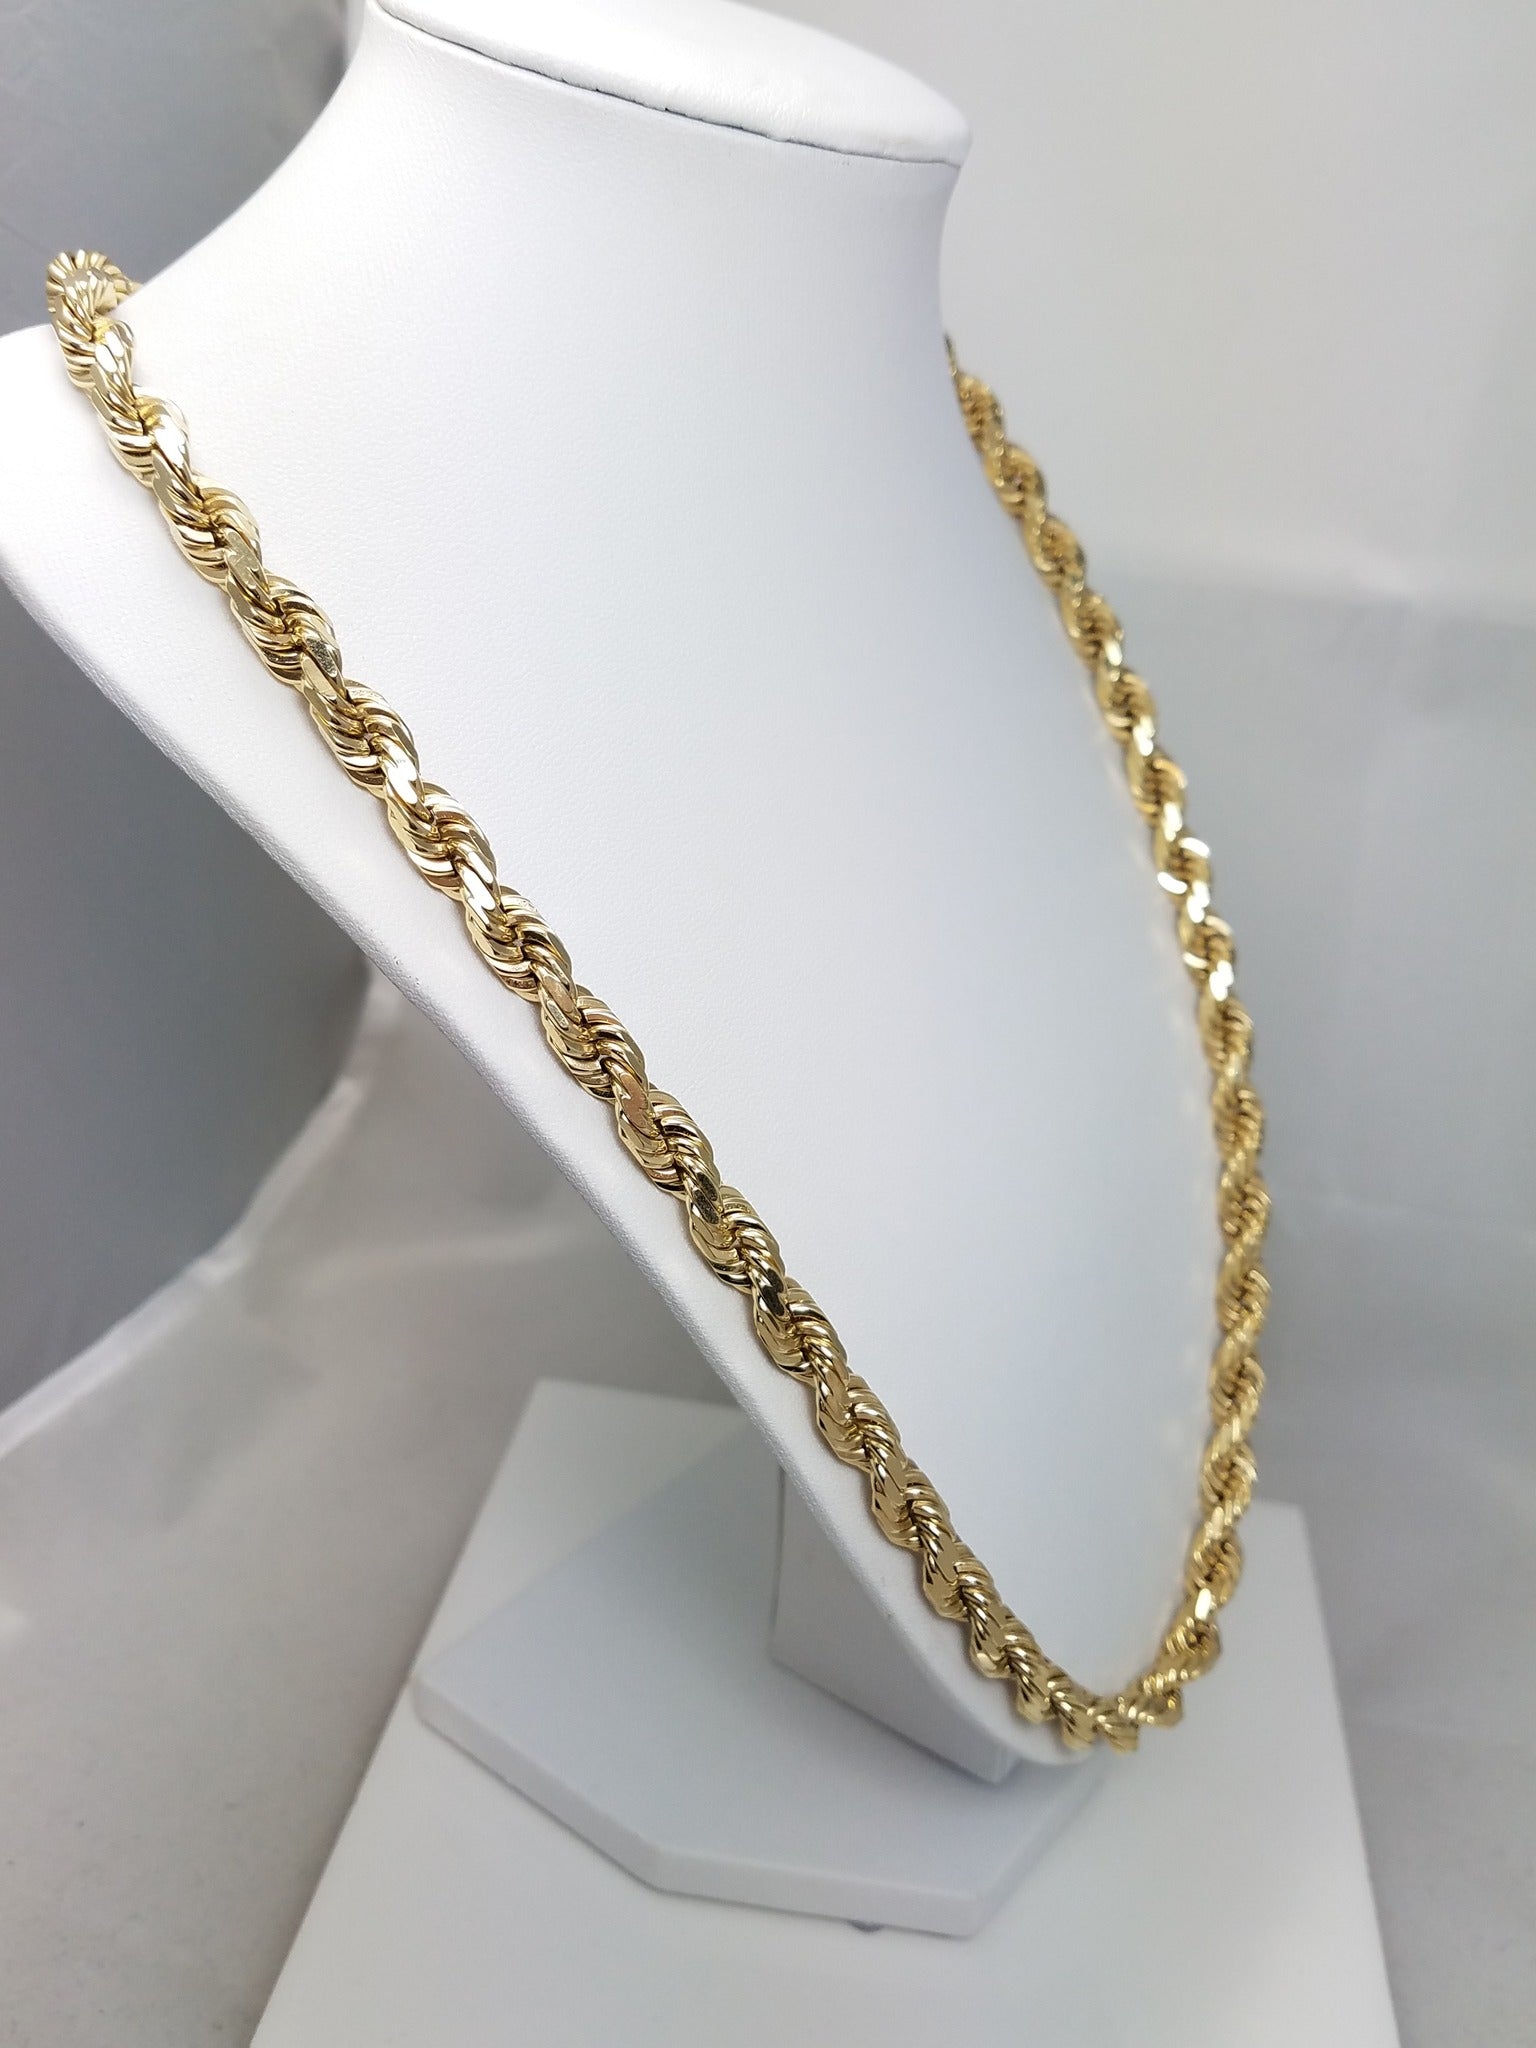 24" 10k Solid Yellow Gold Diamond Cut Rope Chain Necklace